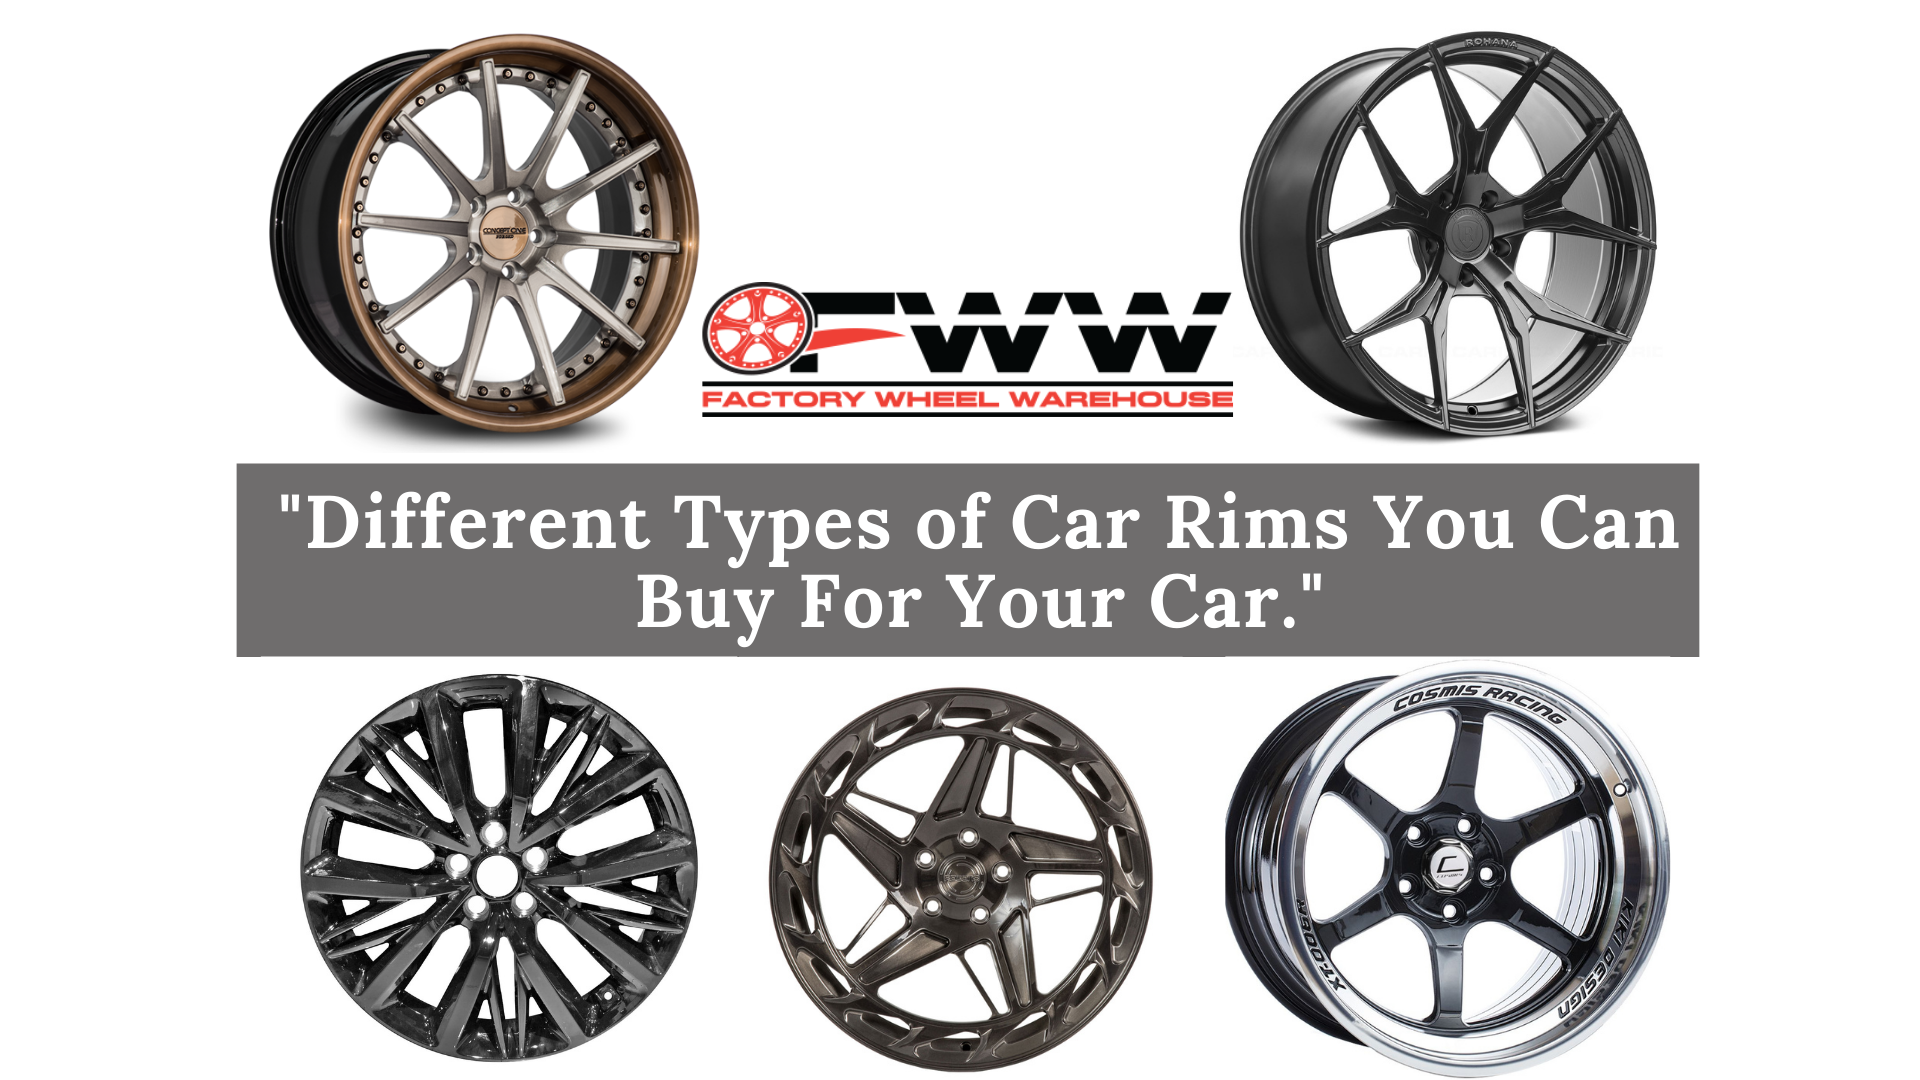 Different Types of Car Rims You Can Buy For Your Car